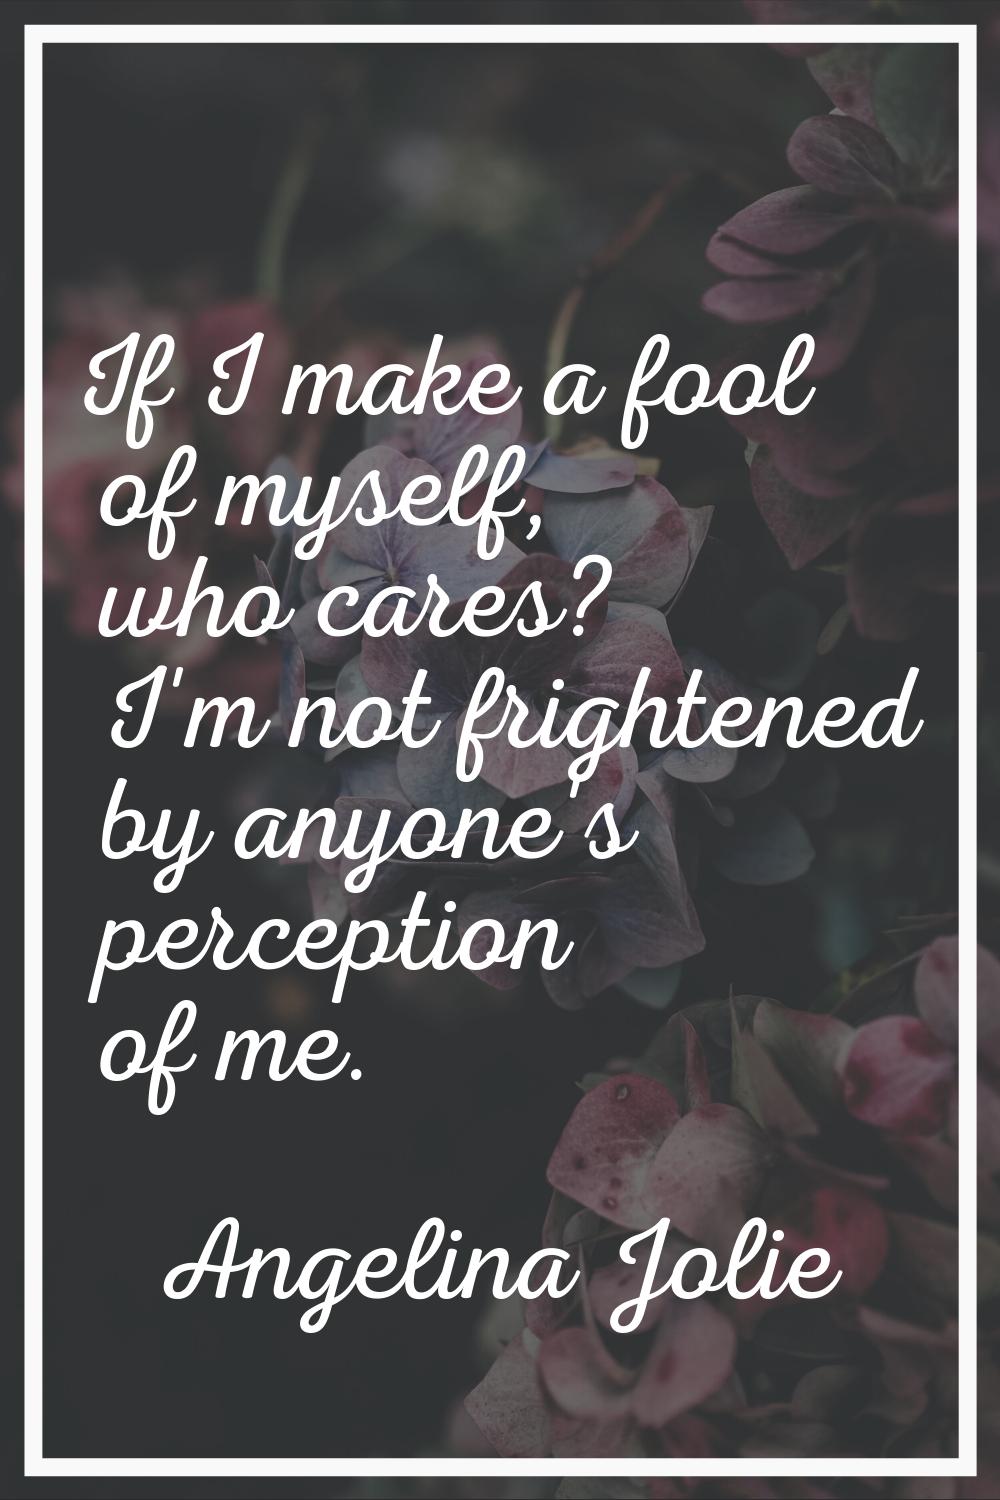 If I make a fool of myself, who cares? I'm not frightened by anyone's perception of me.